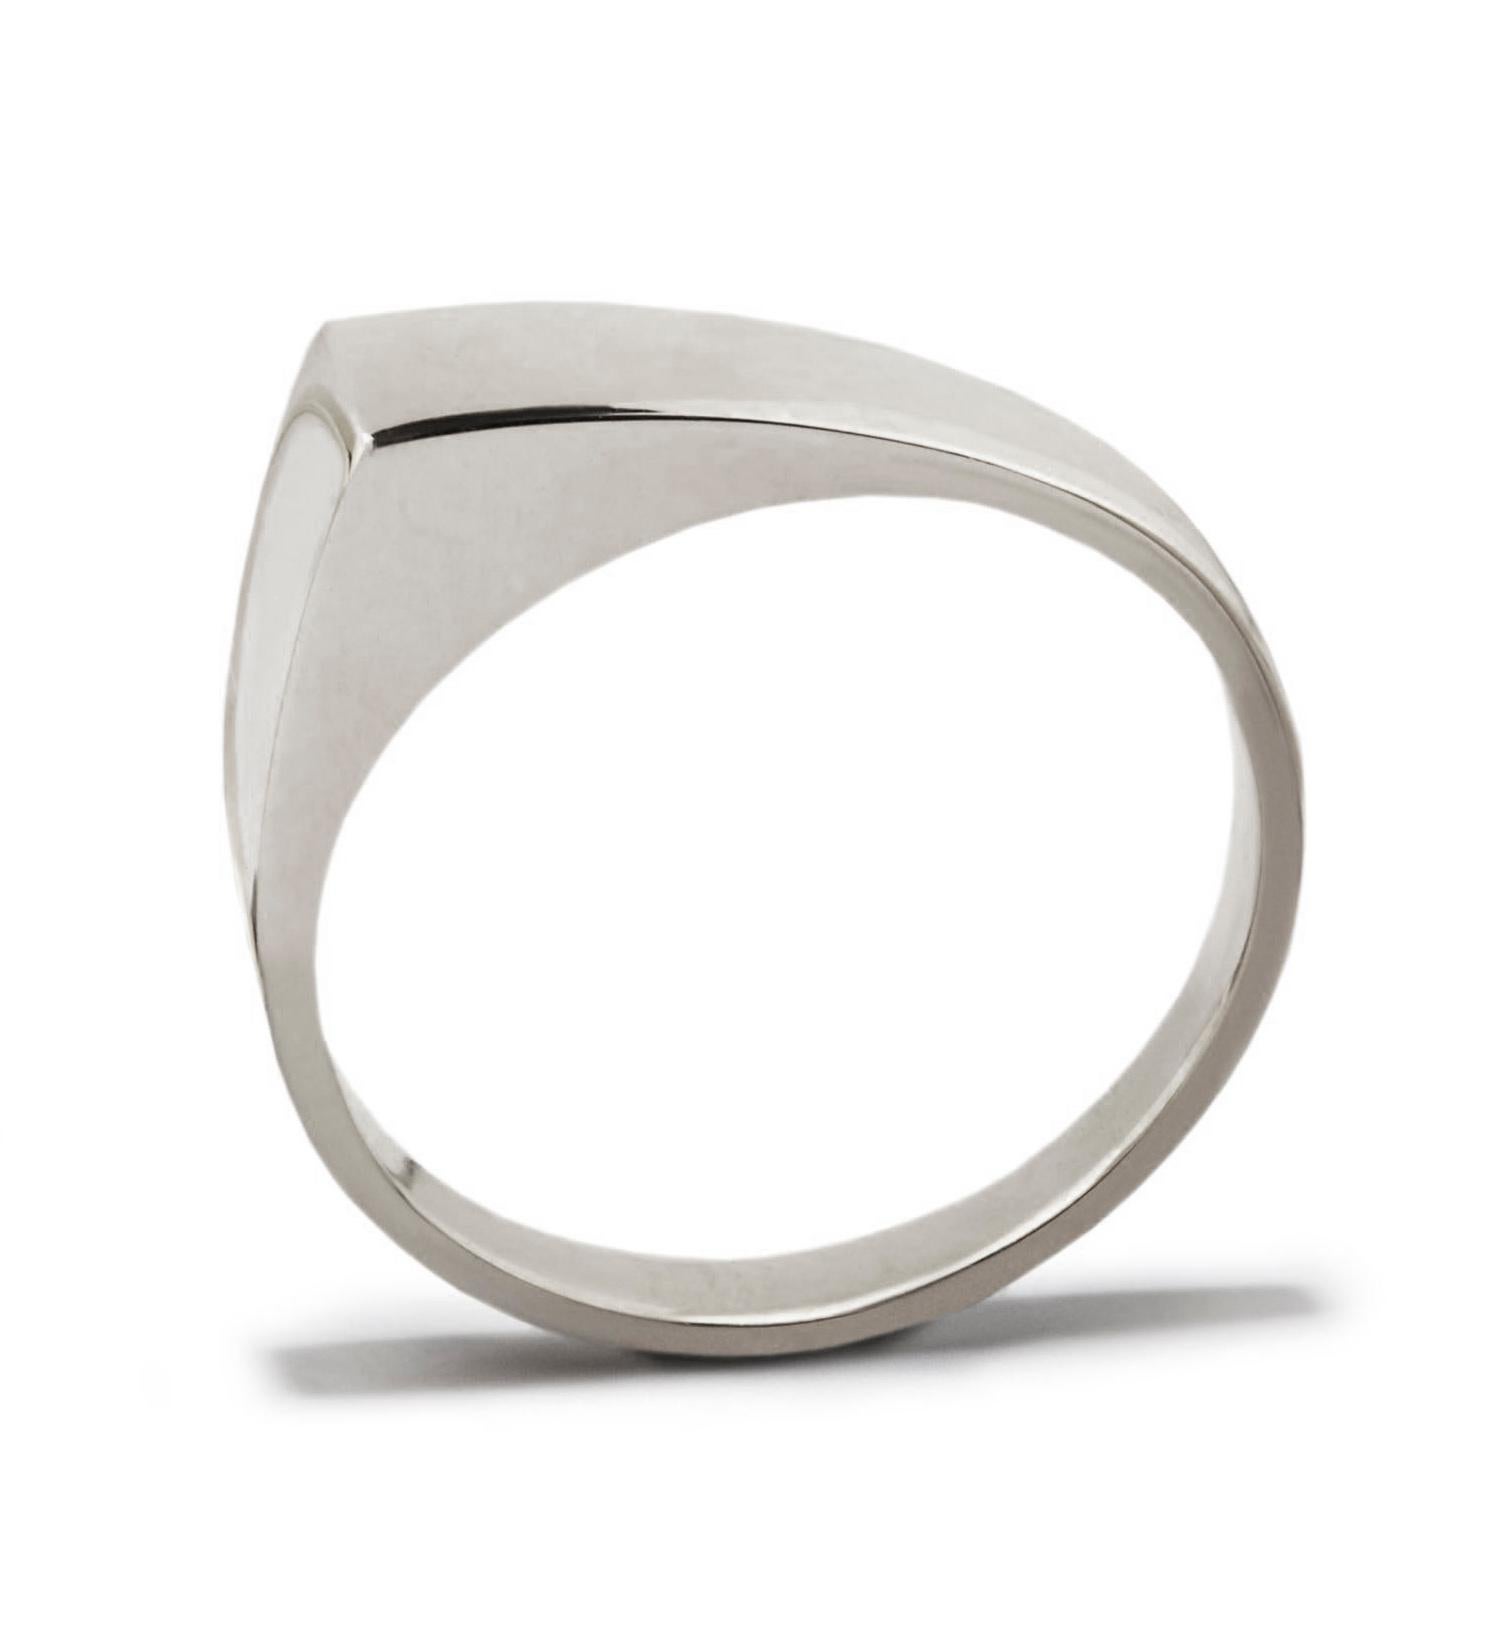 This simple style is an edgy take on the stacking ring.  Crafted in solid sterling silver, it is polished to a high shine with rounded edges for comfort.  In stock in UK size L (equivalent to US size 5 1/2 or European size 51 3/4 ). Also available